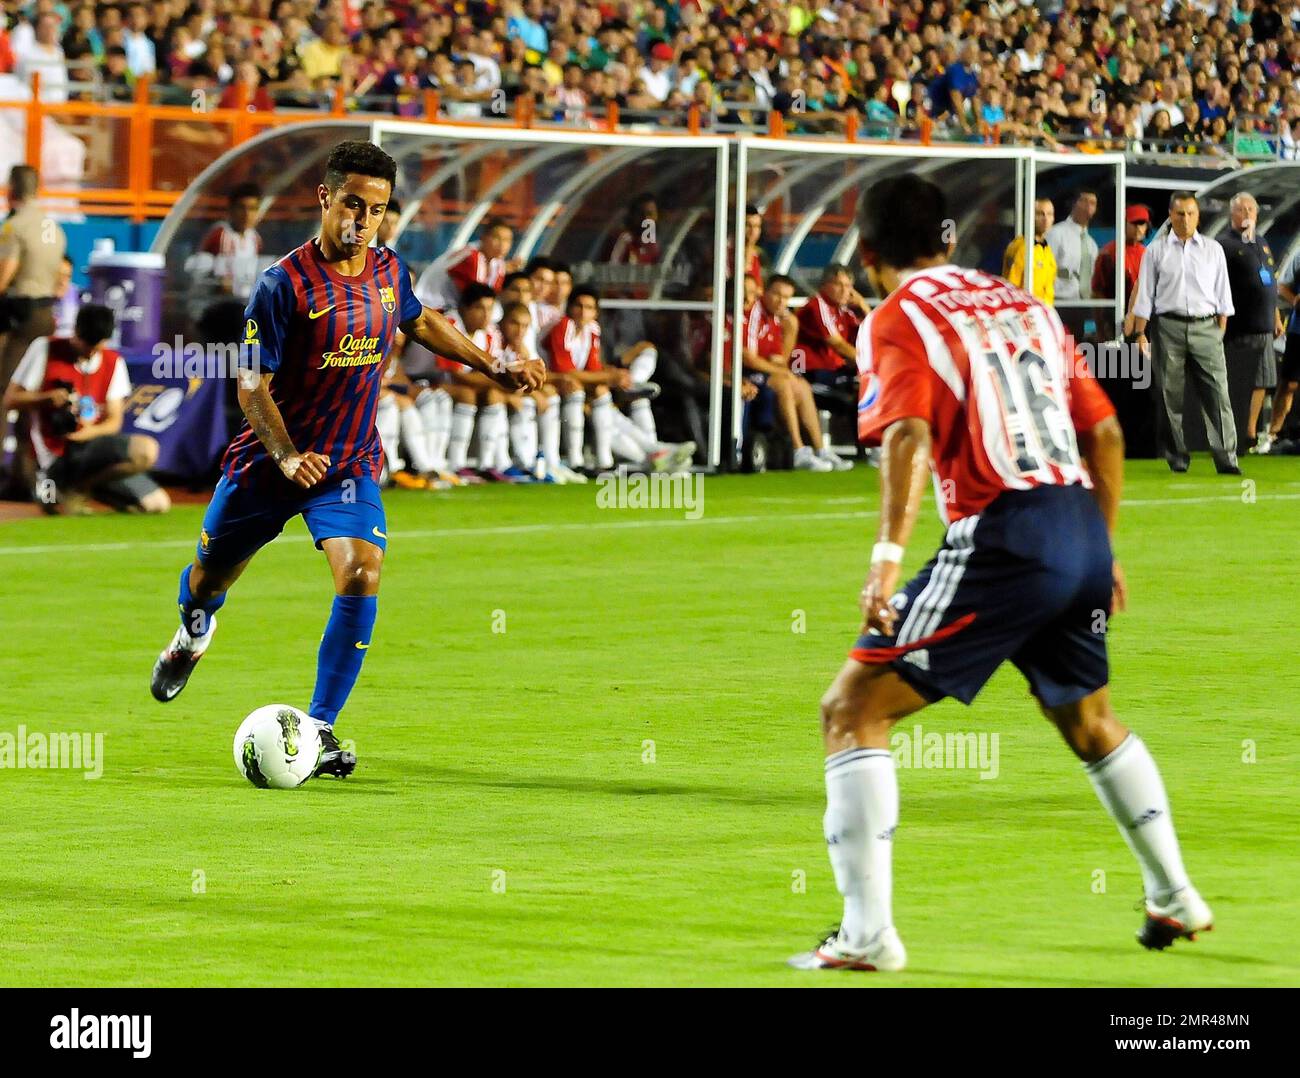 Shakira's boyfriend Gerard Pique (#3) plays with FC Barcelona in its match with CD Guadalajara during the Herbalife World Football Challenge match at Sun Life Stadium in Miami, FL. 3rd August 2011.   . Stock Photo